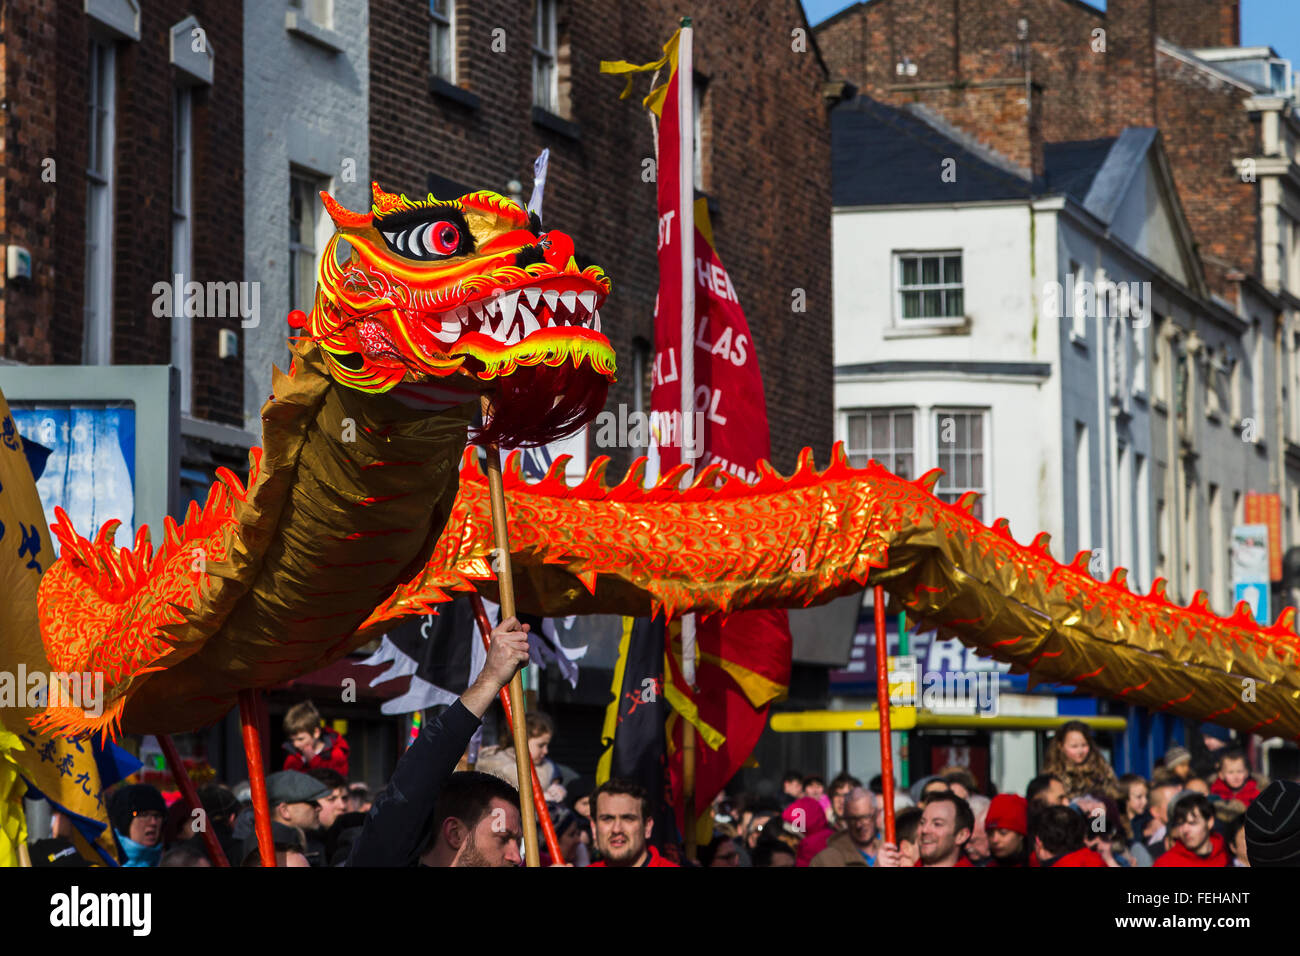 The vivid orange coloured dragon seen dancing around the main streets which make up Liverpool's Chinatown. Stock Photo